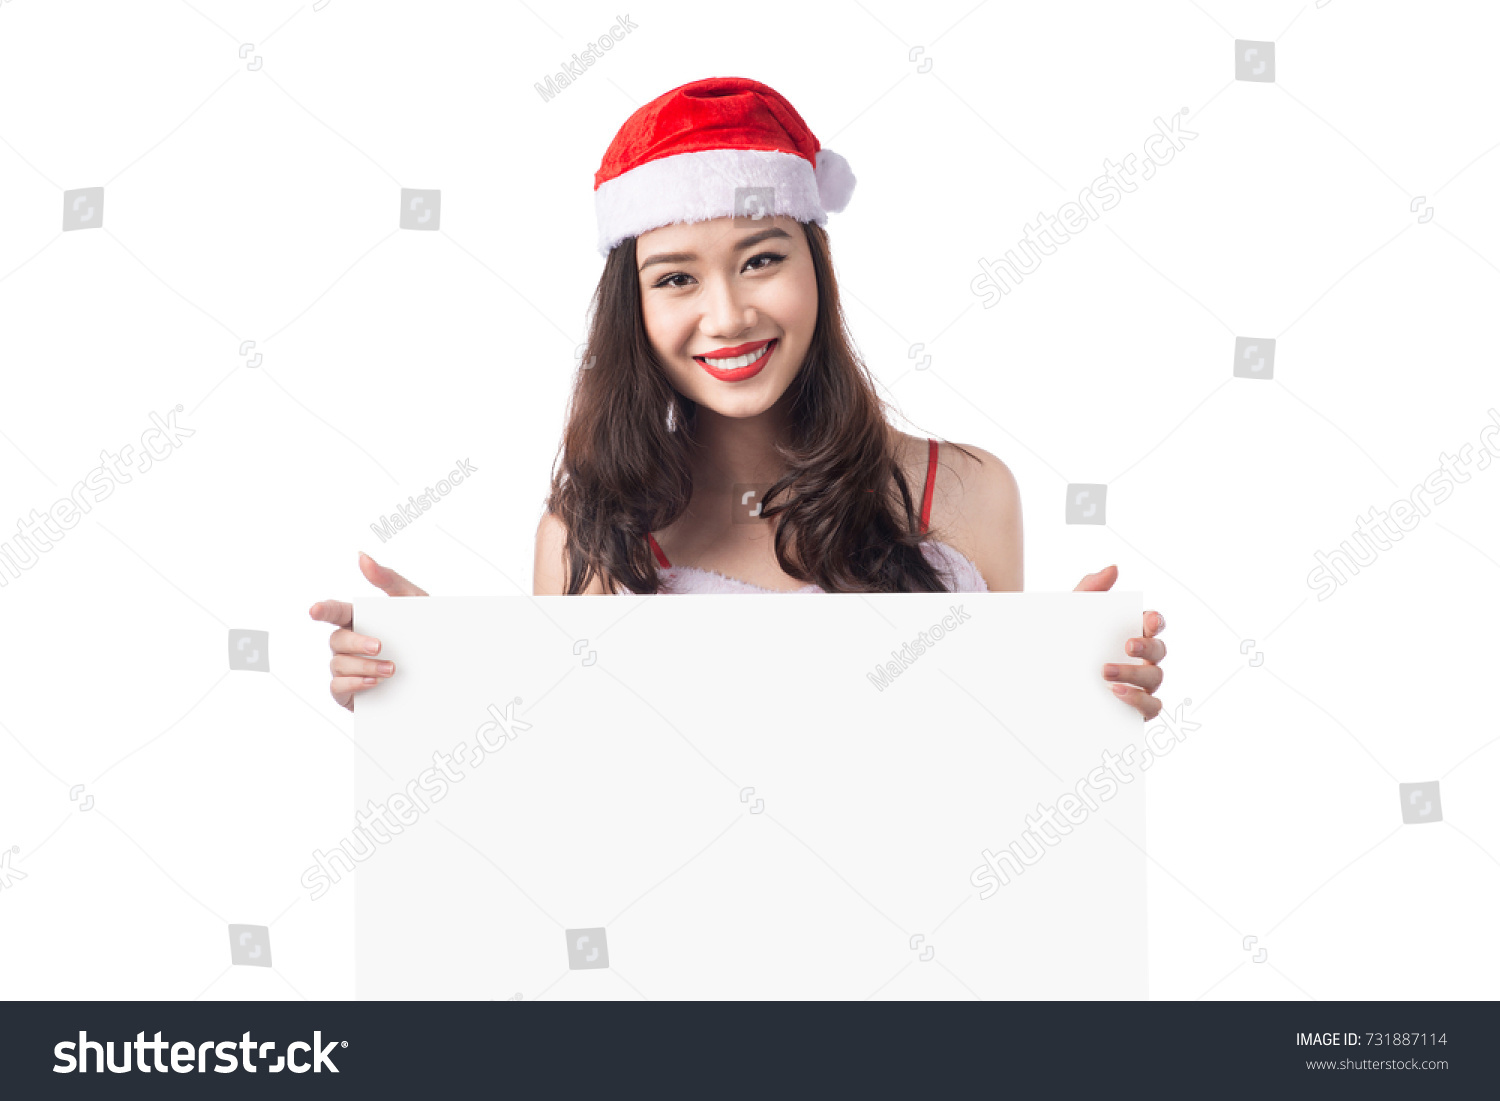 Asian Christmas girl with Santa Claus clothes holding blank sign isolated on white background #731887114